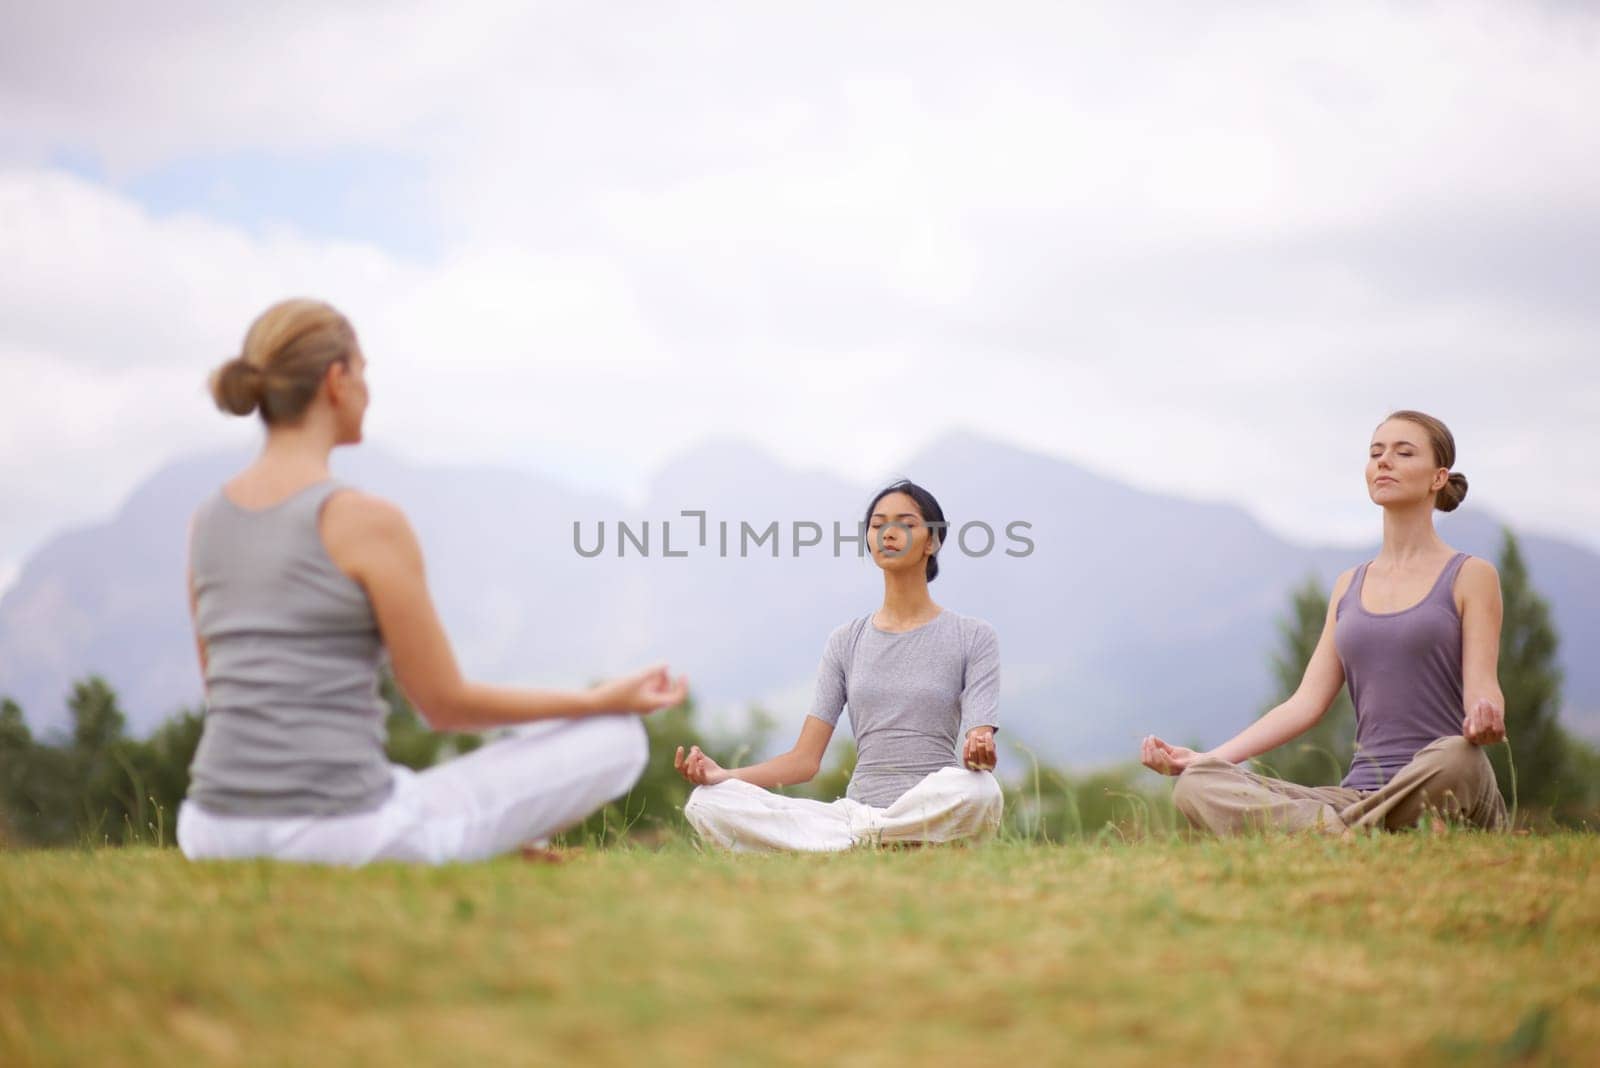 Lotus, instructor and meditation outdoor for yoga, healthy body and mindfulness exercise to relax. Peace, group and calm women in padmasana in nature for balance, spirituality or breathing together.